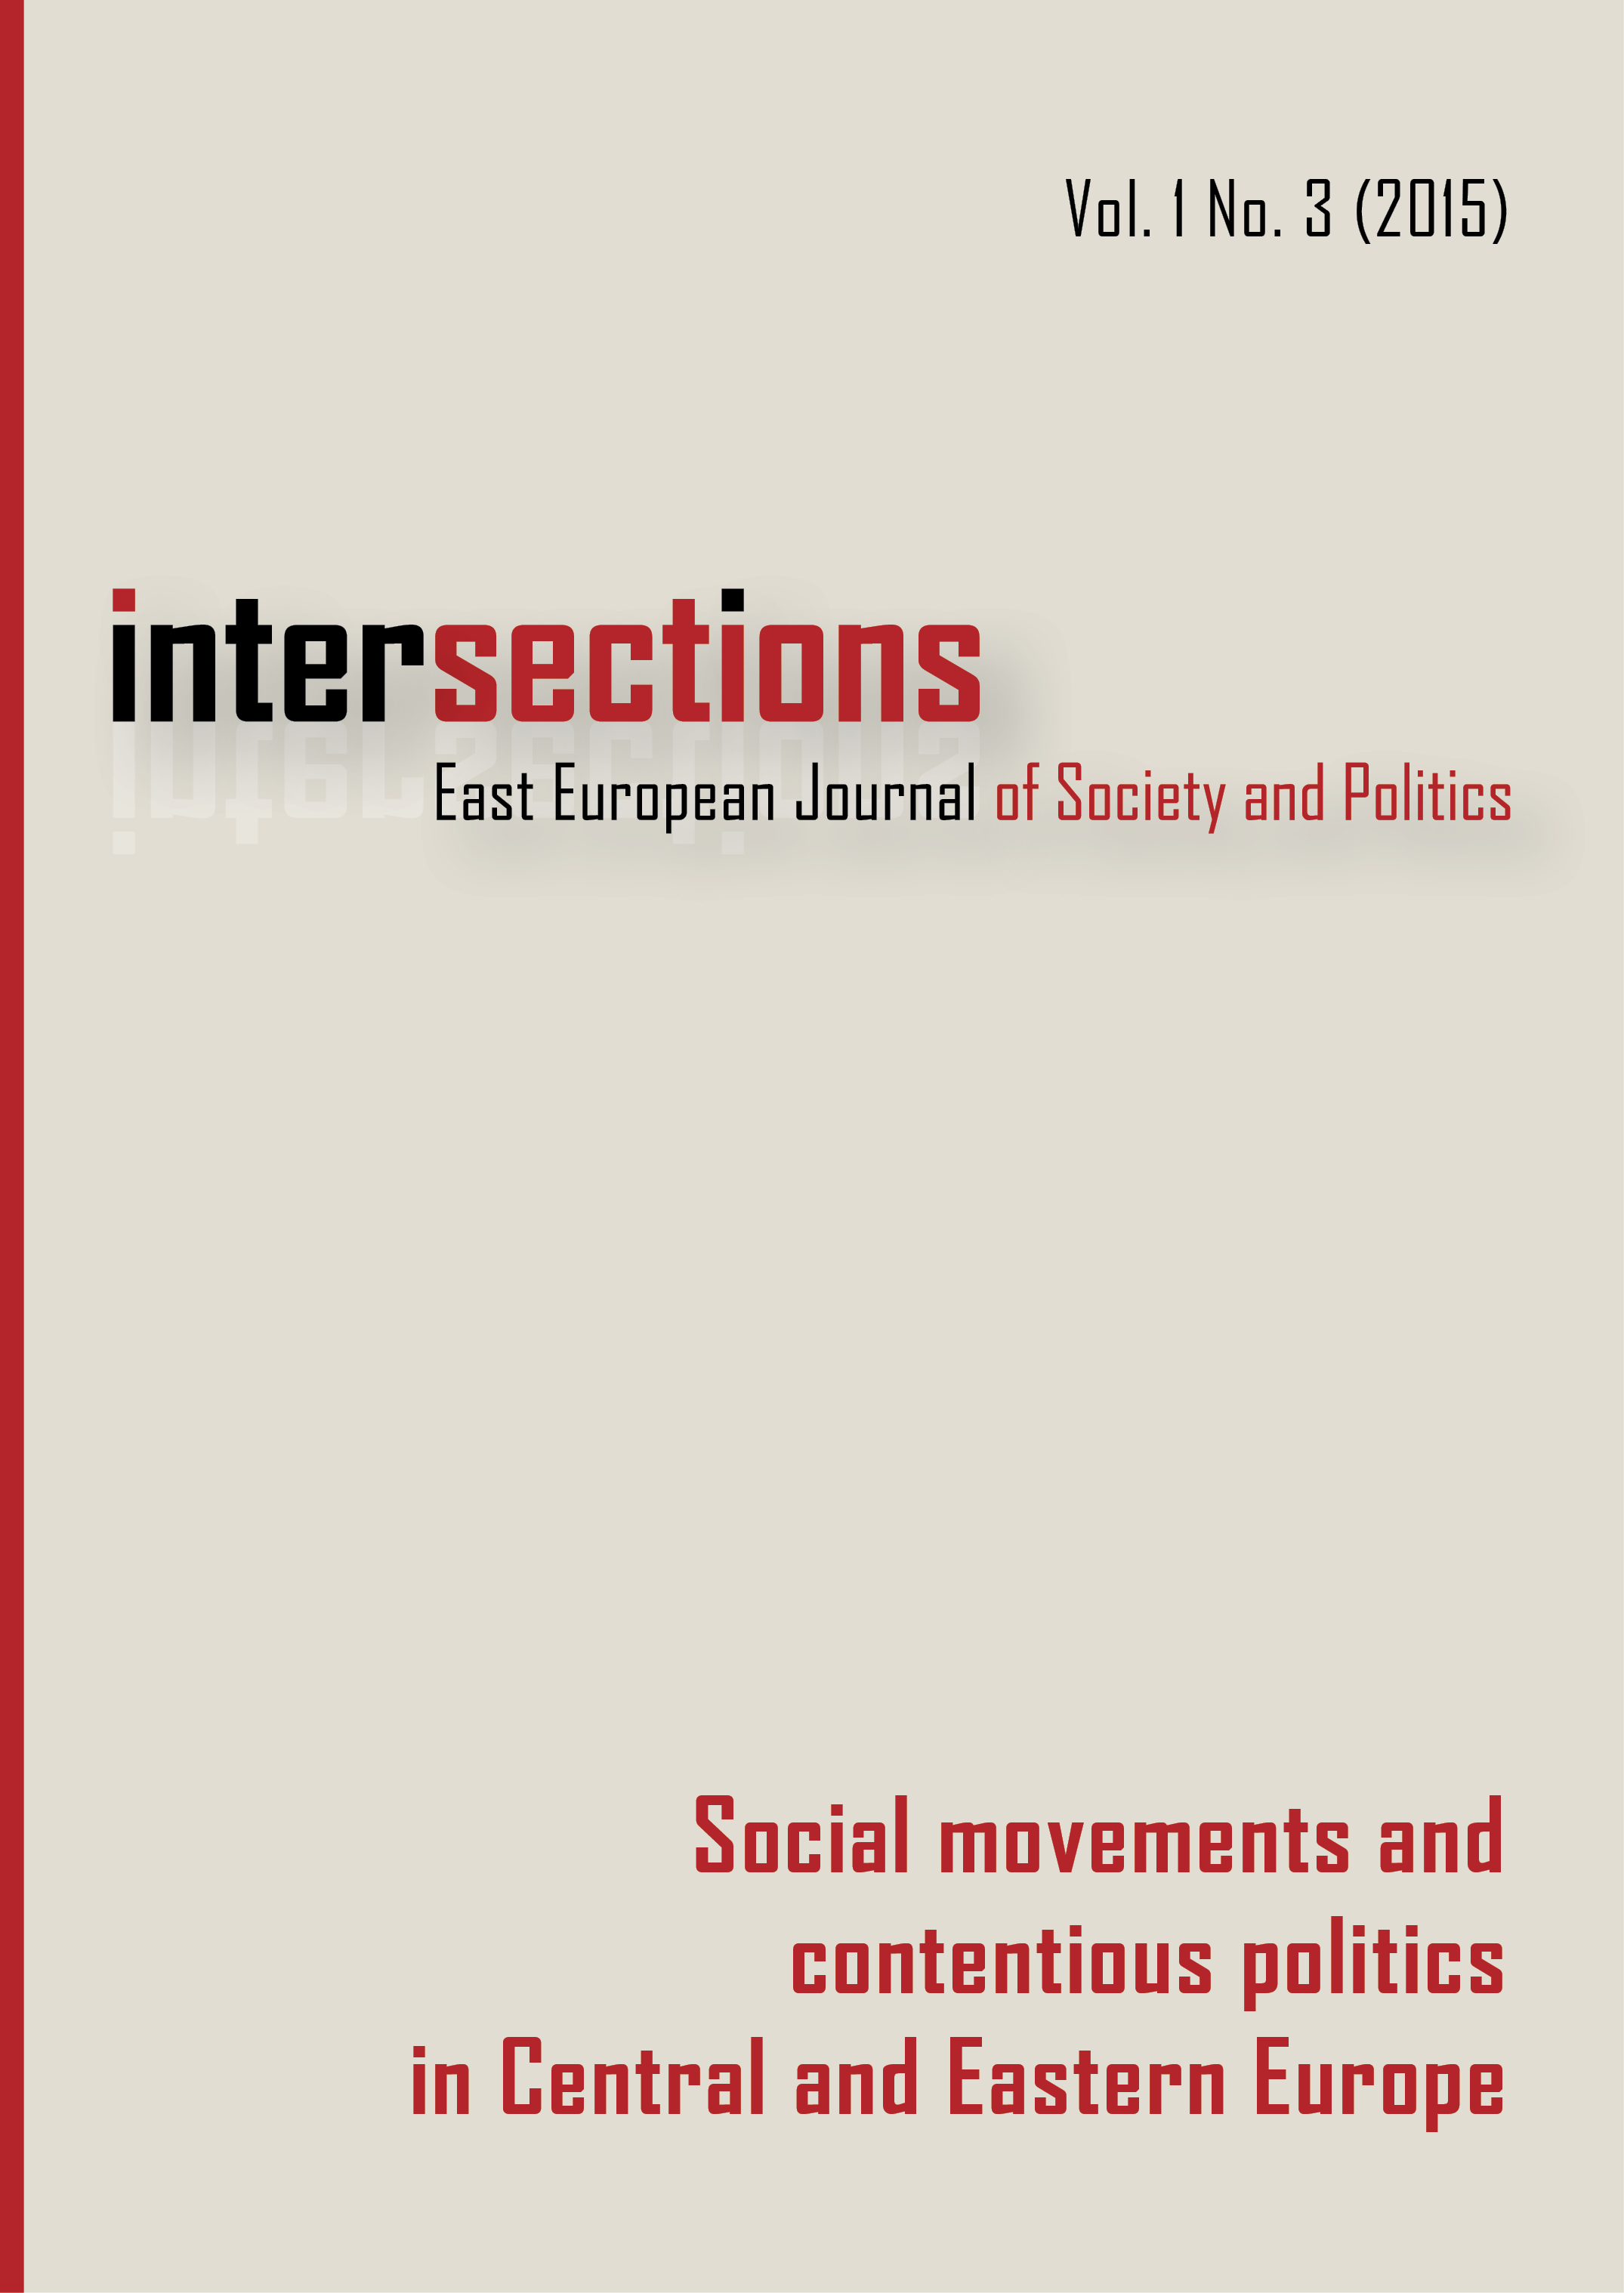 					View Vol. 1 No. 3 (2015): Social Movements and Contentious Politics in Central and Eastern Europe
				